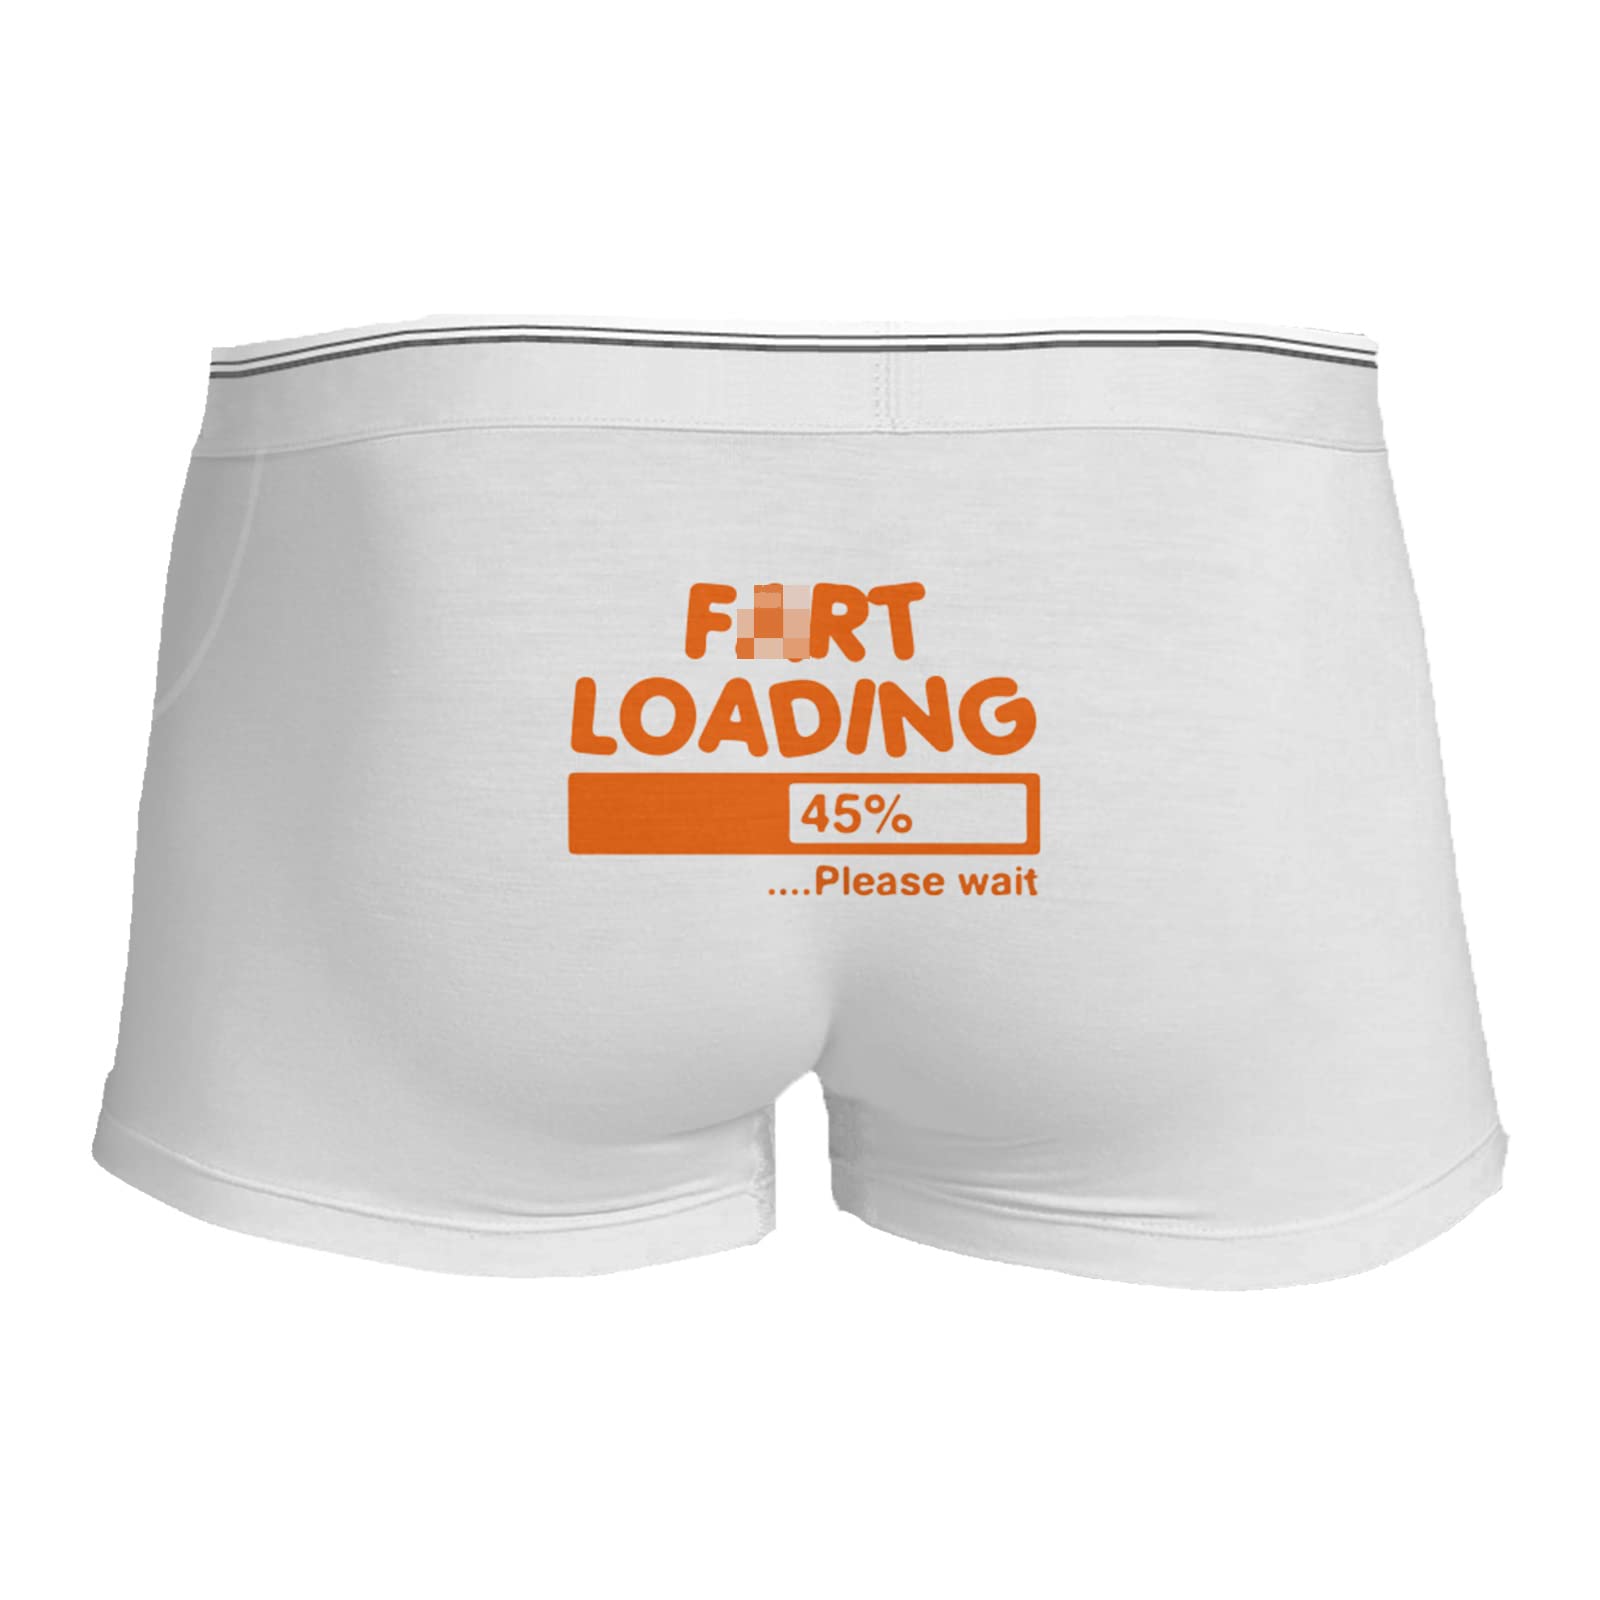 14 Amazing Funny Boxer Shorts For Men for 2023